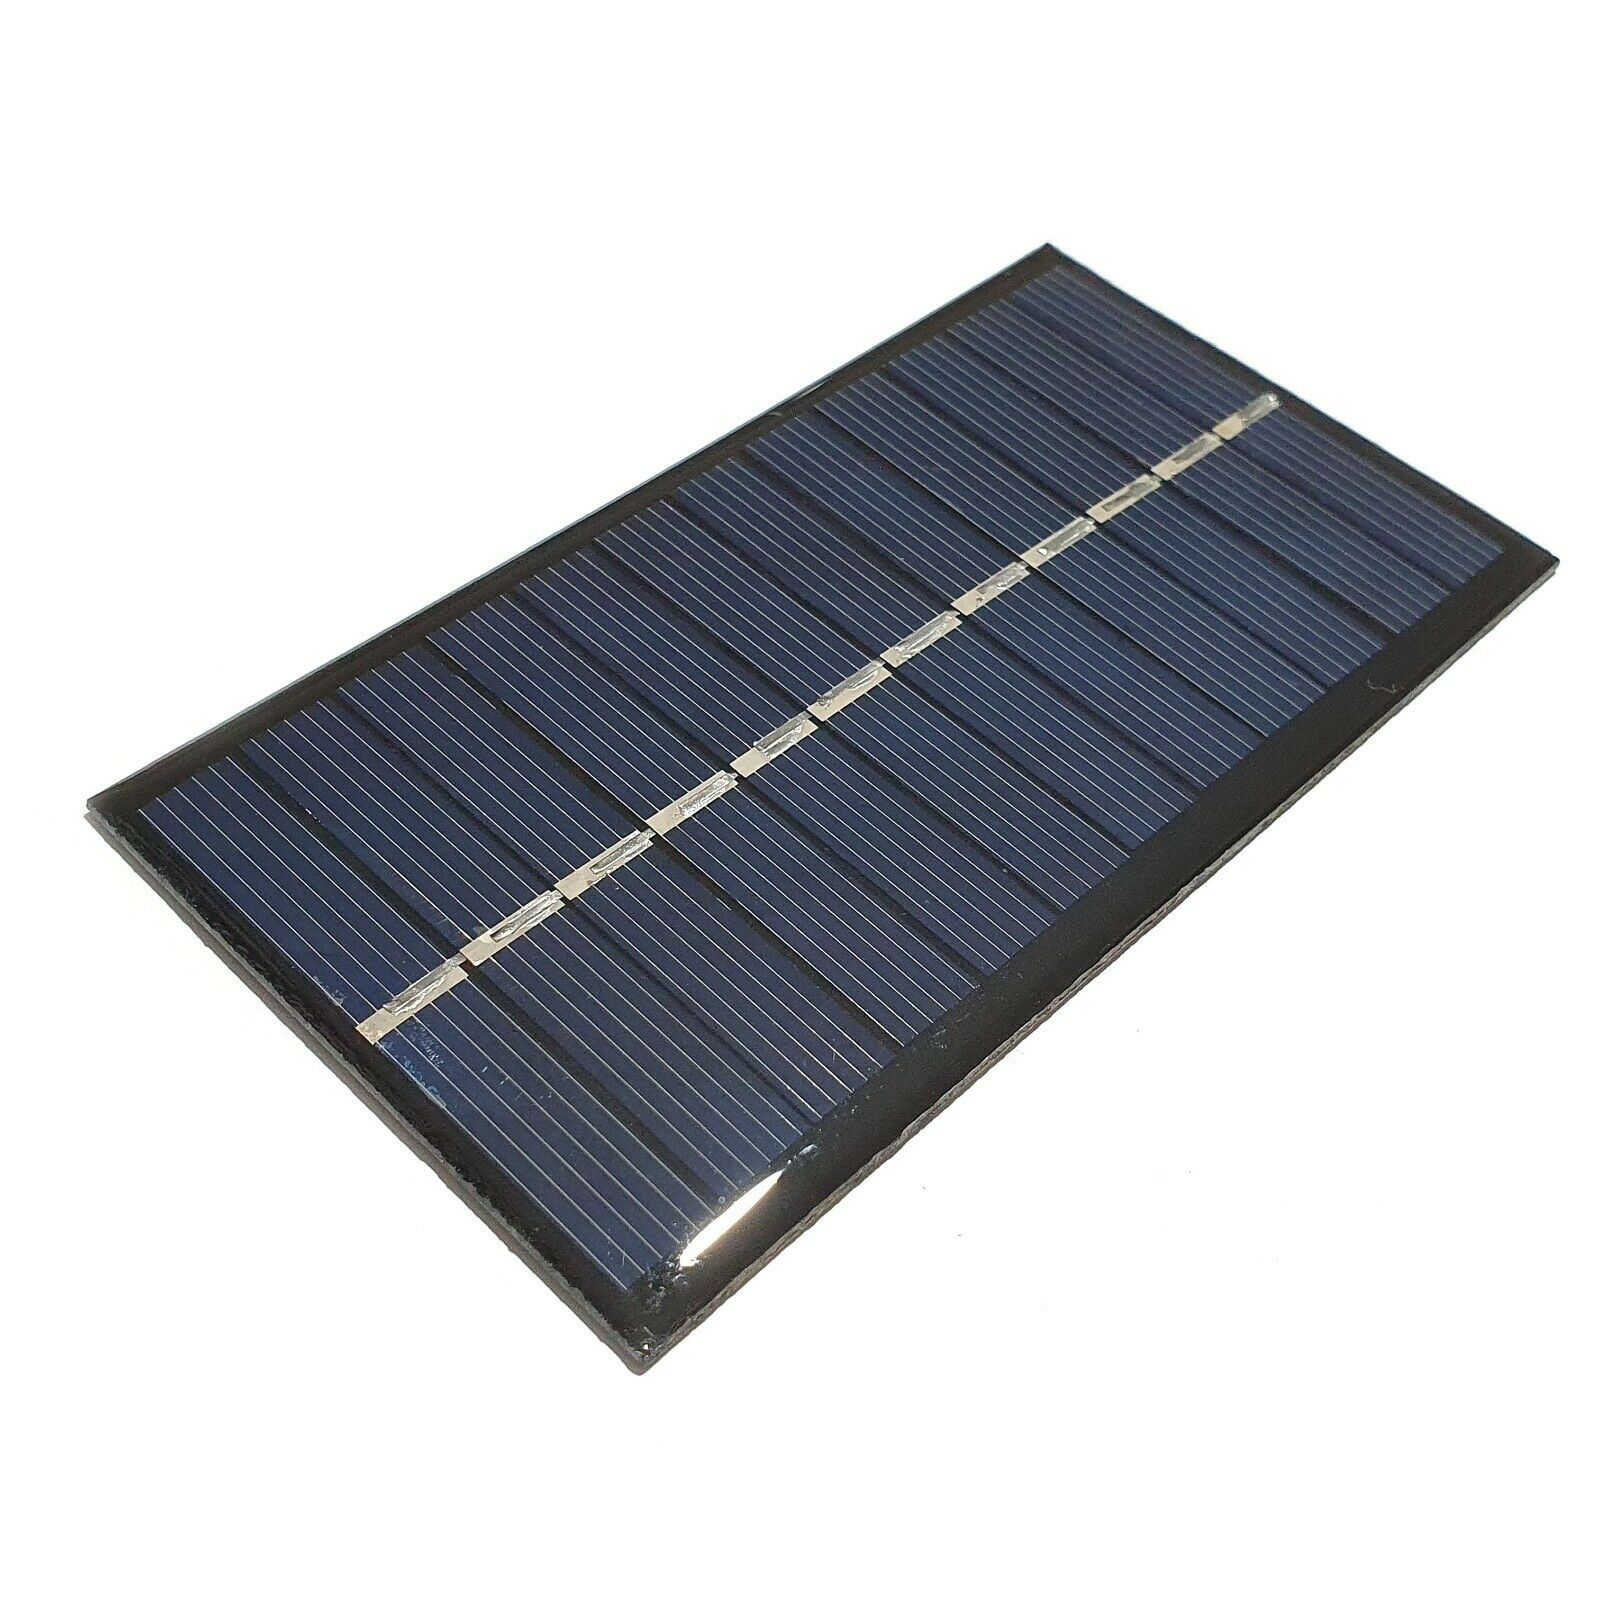 6V Solar Panel Cell Epoxy 1W for DIY Solar Projects Electronics etc 110 x 60mm